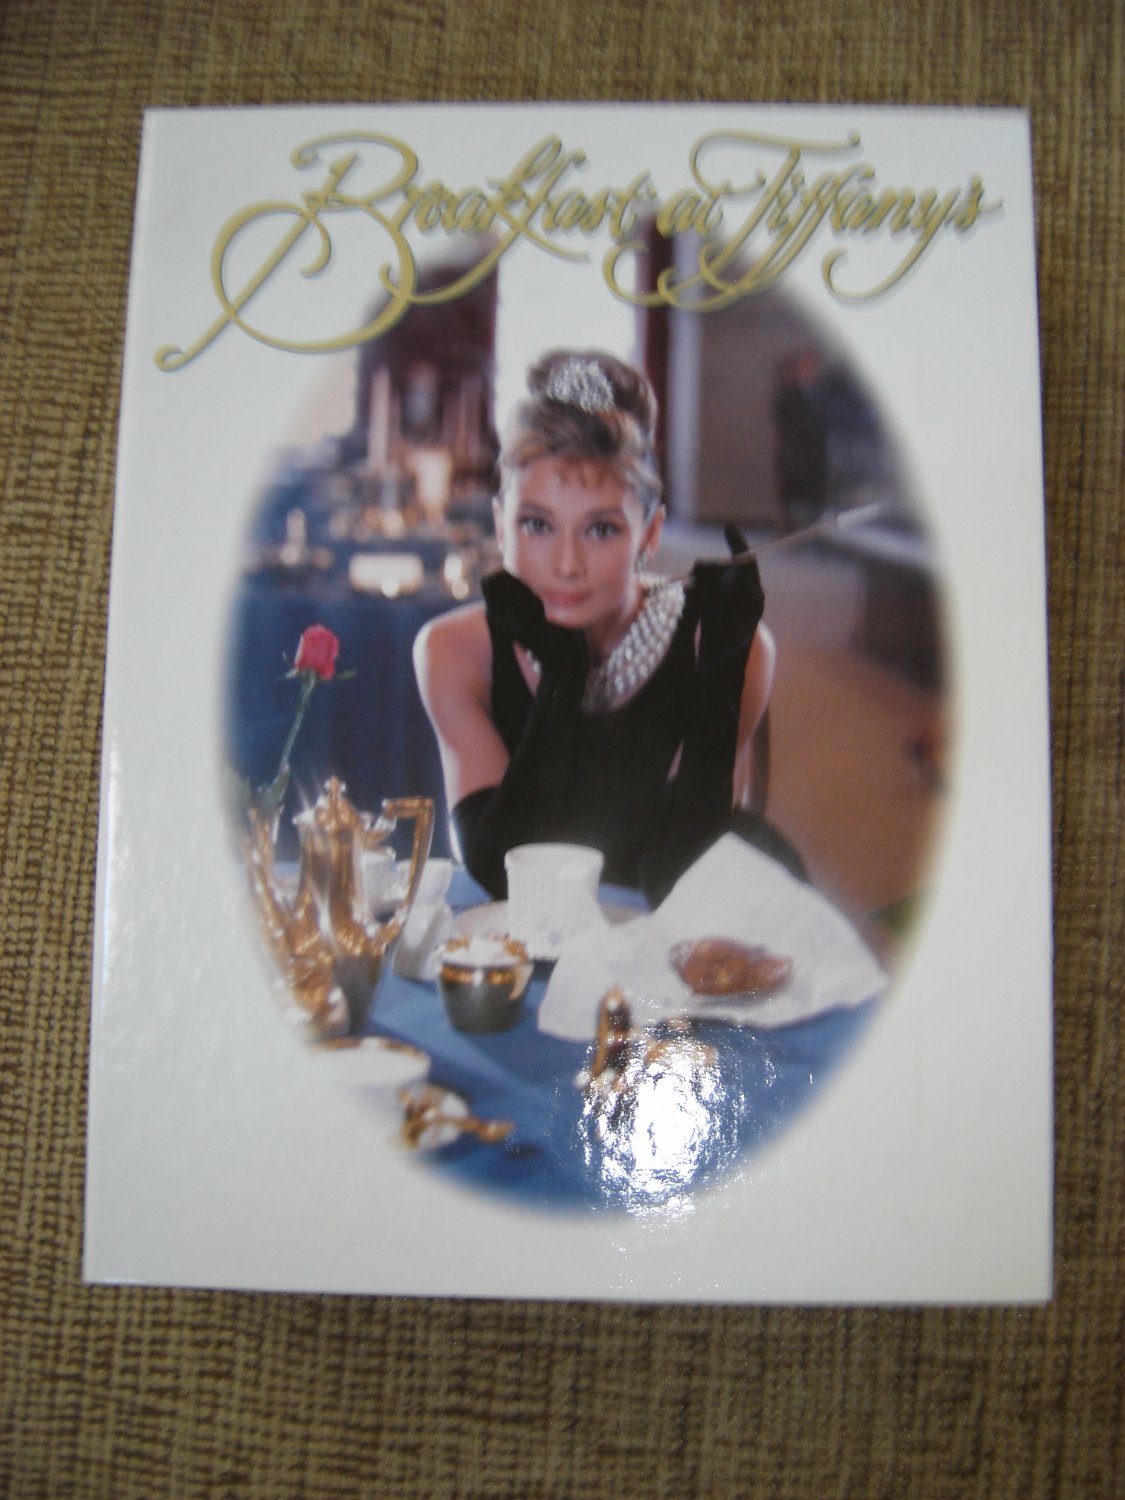 BREAKFAST AT TIFFANY'S - COLLECTOR'S EDITION VHS Box Set (1961 